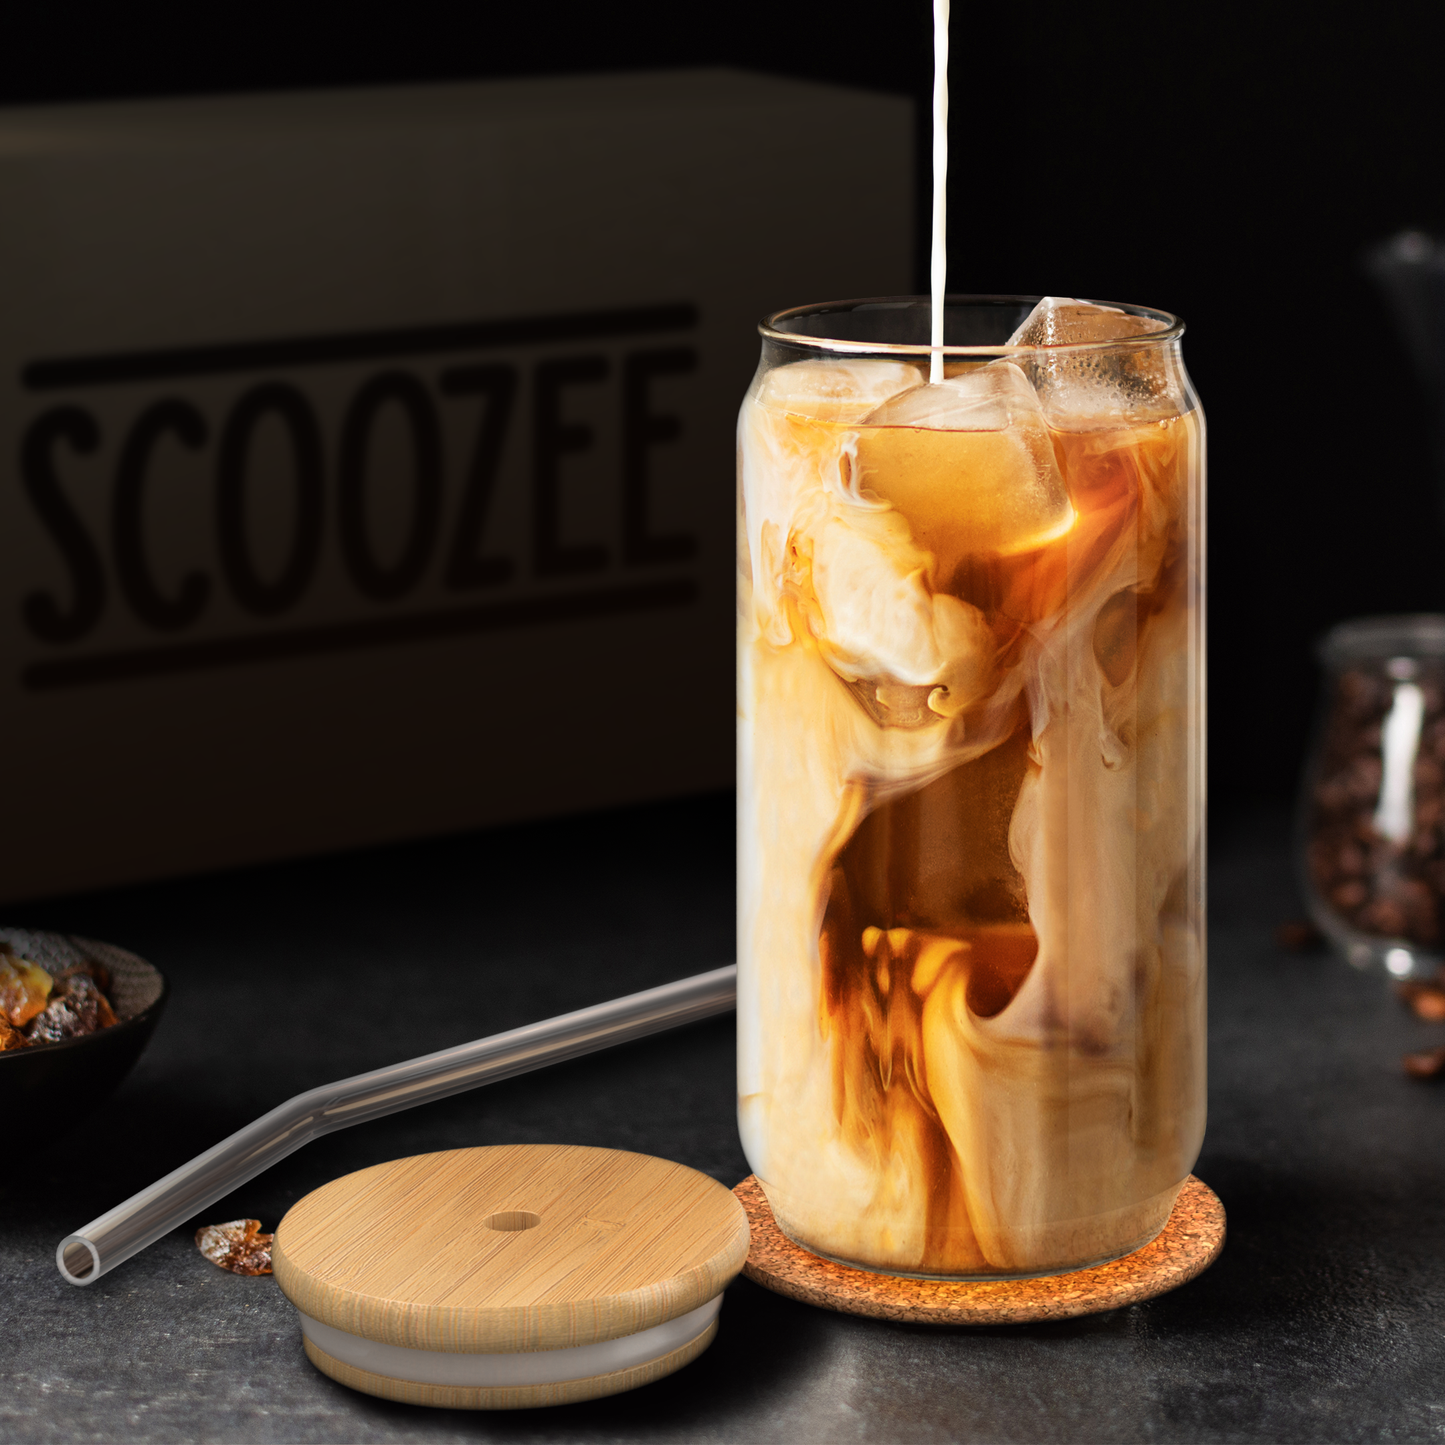 Scoozee Glass Cups with Bamboo Lids Review - Is It Worth It? 